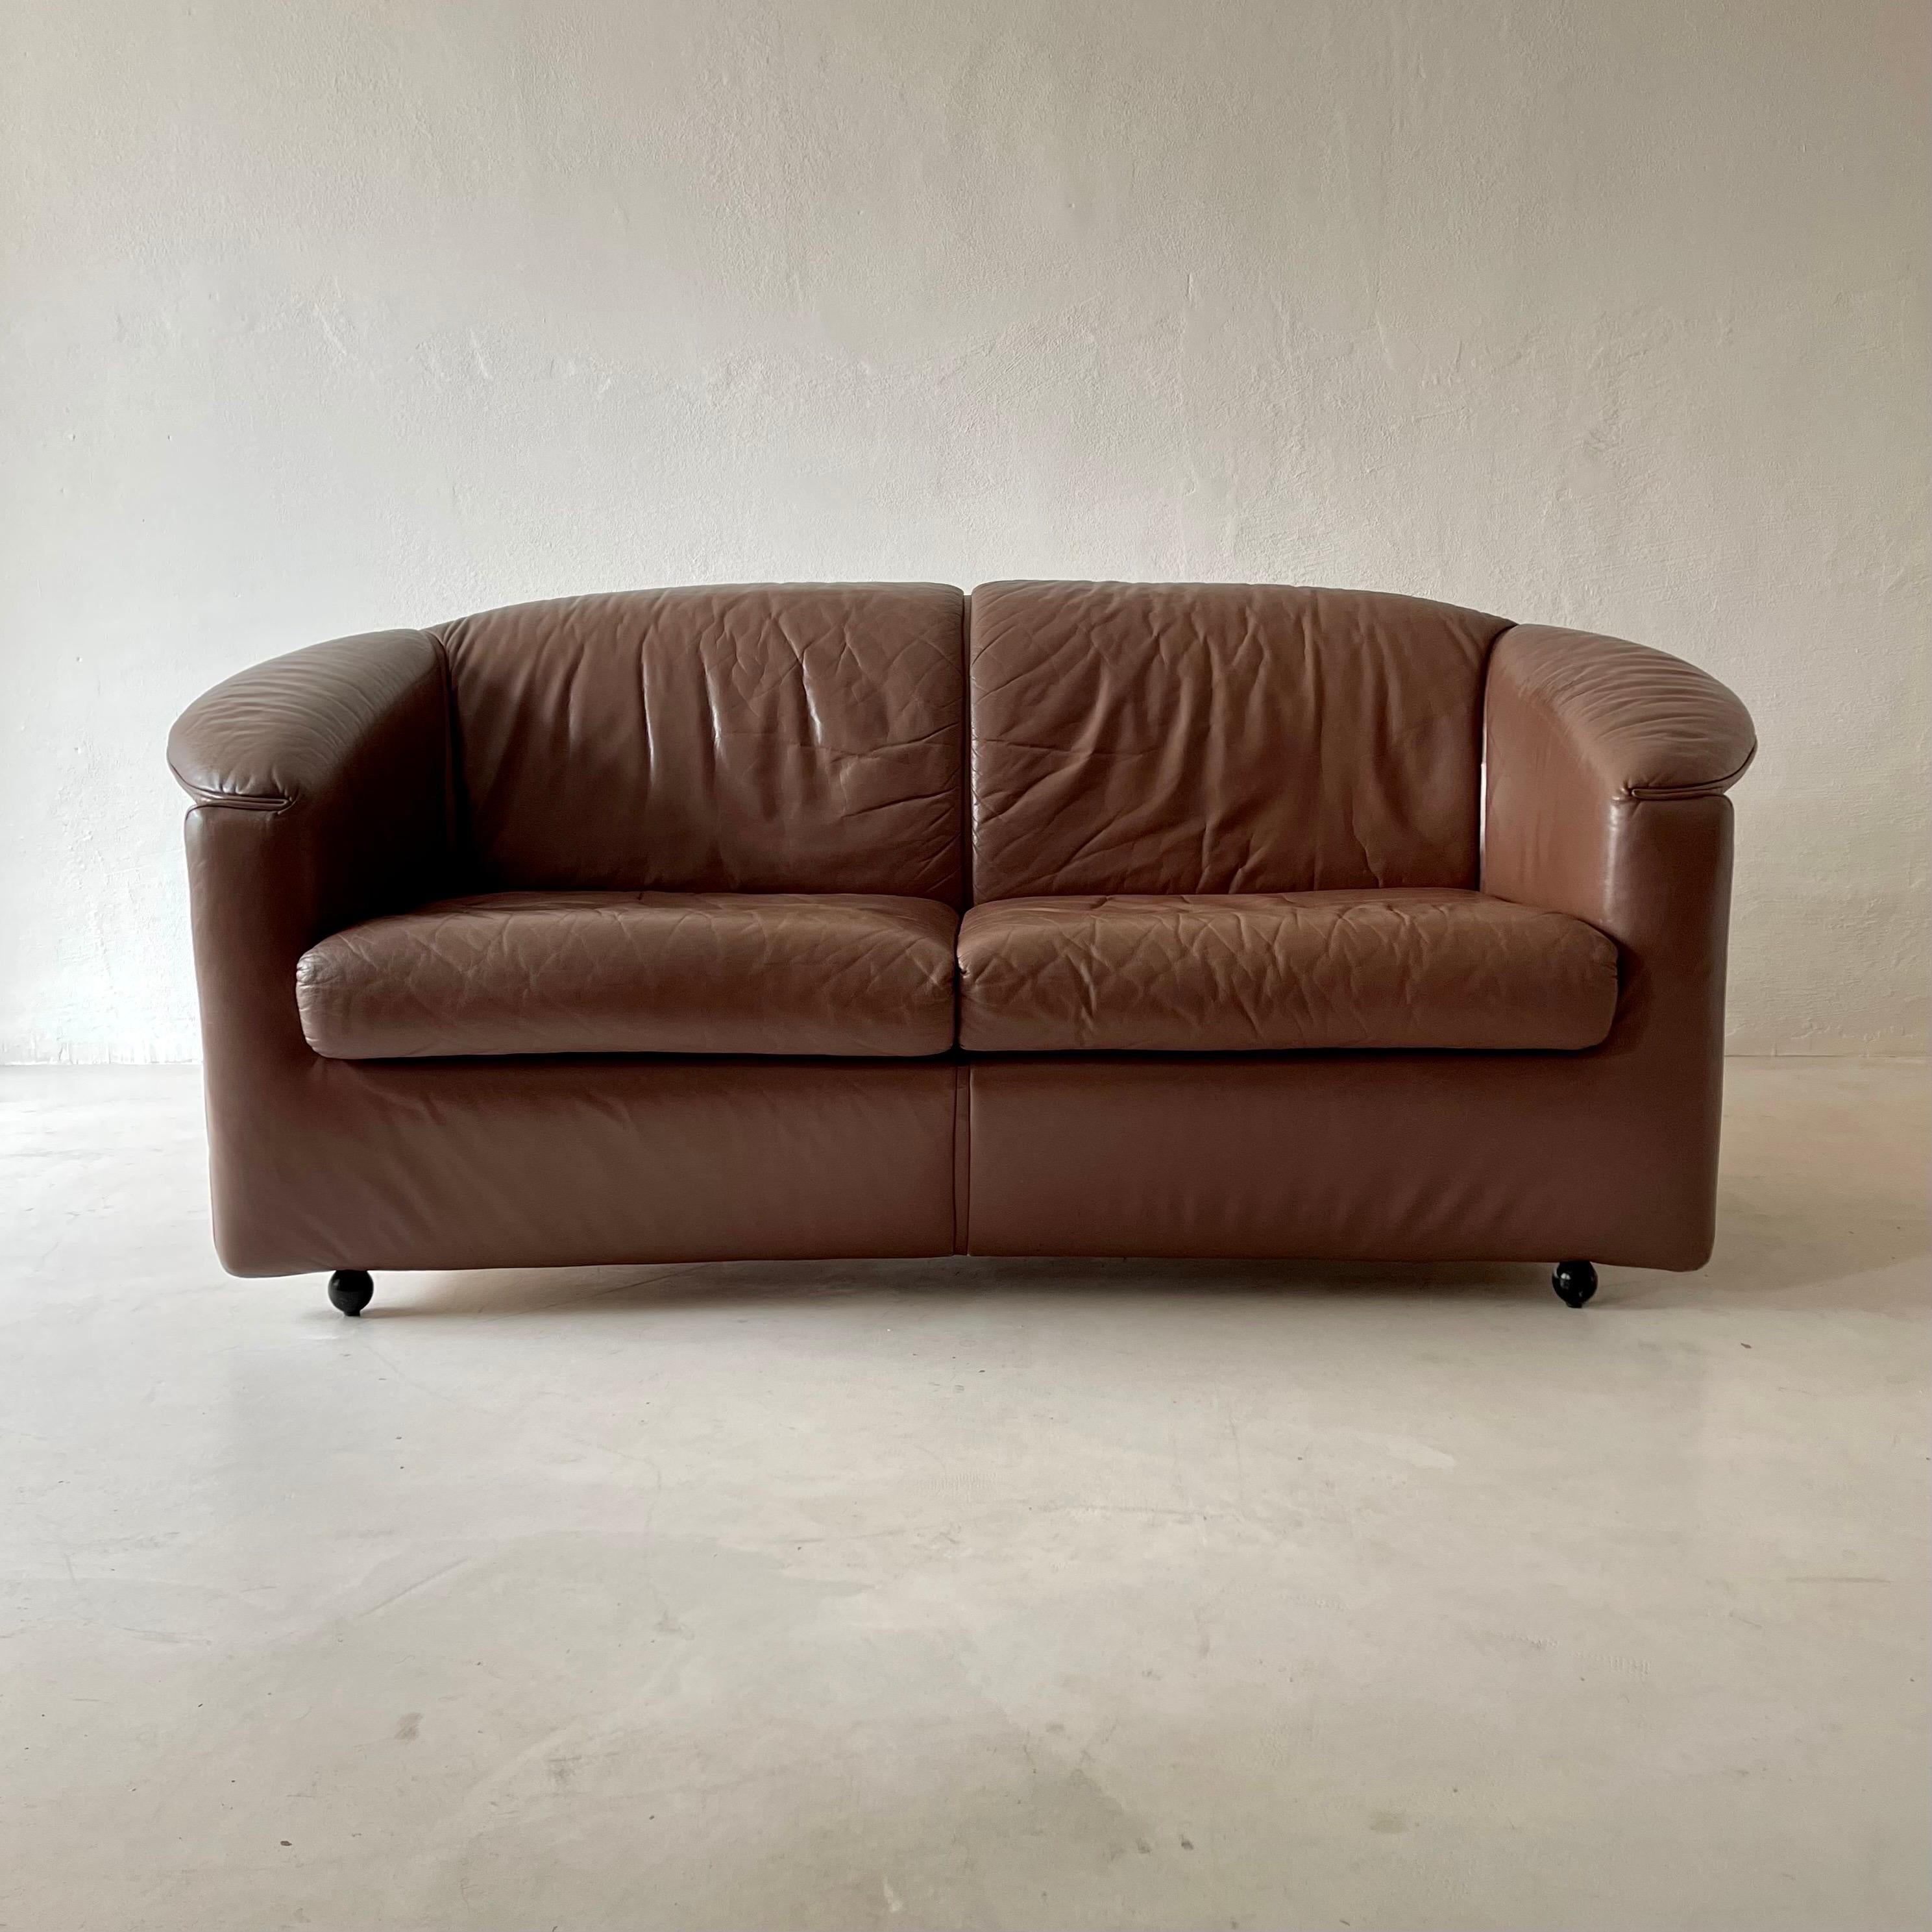 Post-Modern Aura Sofa Loveseat by Paolo Piva for Wittmann For Sale